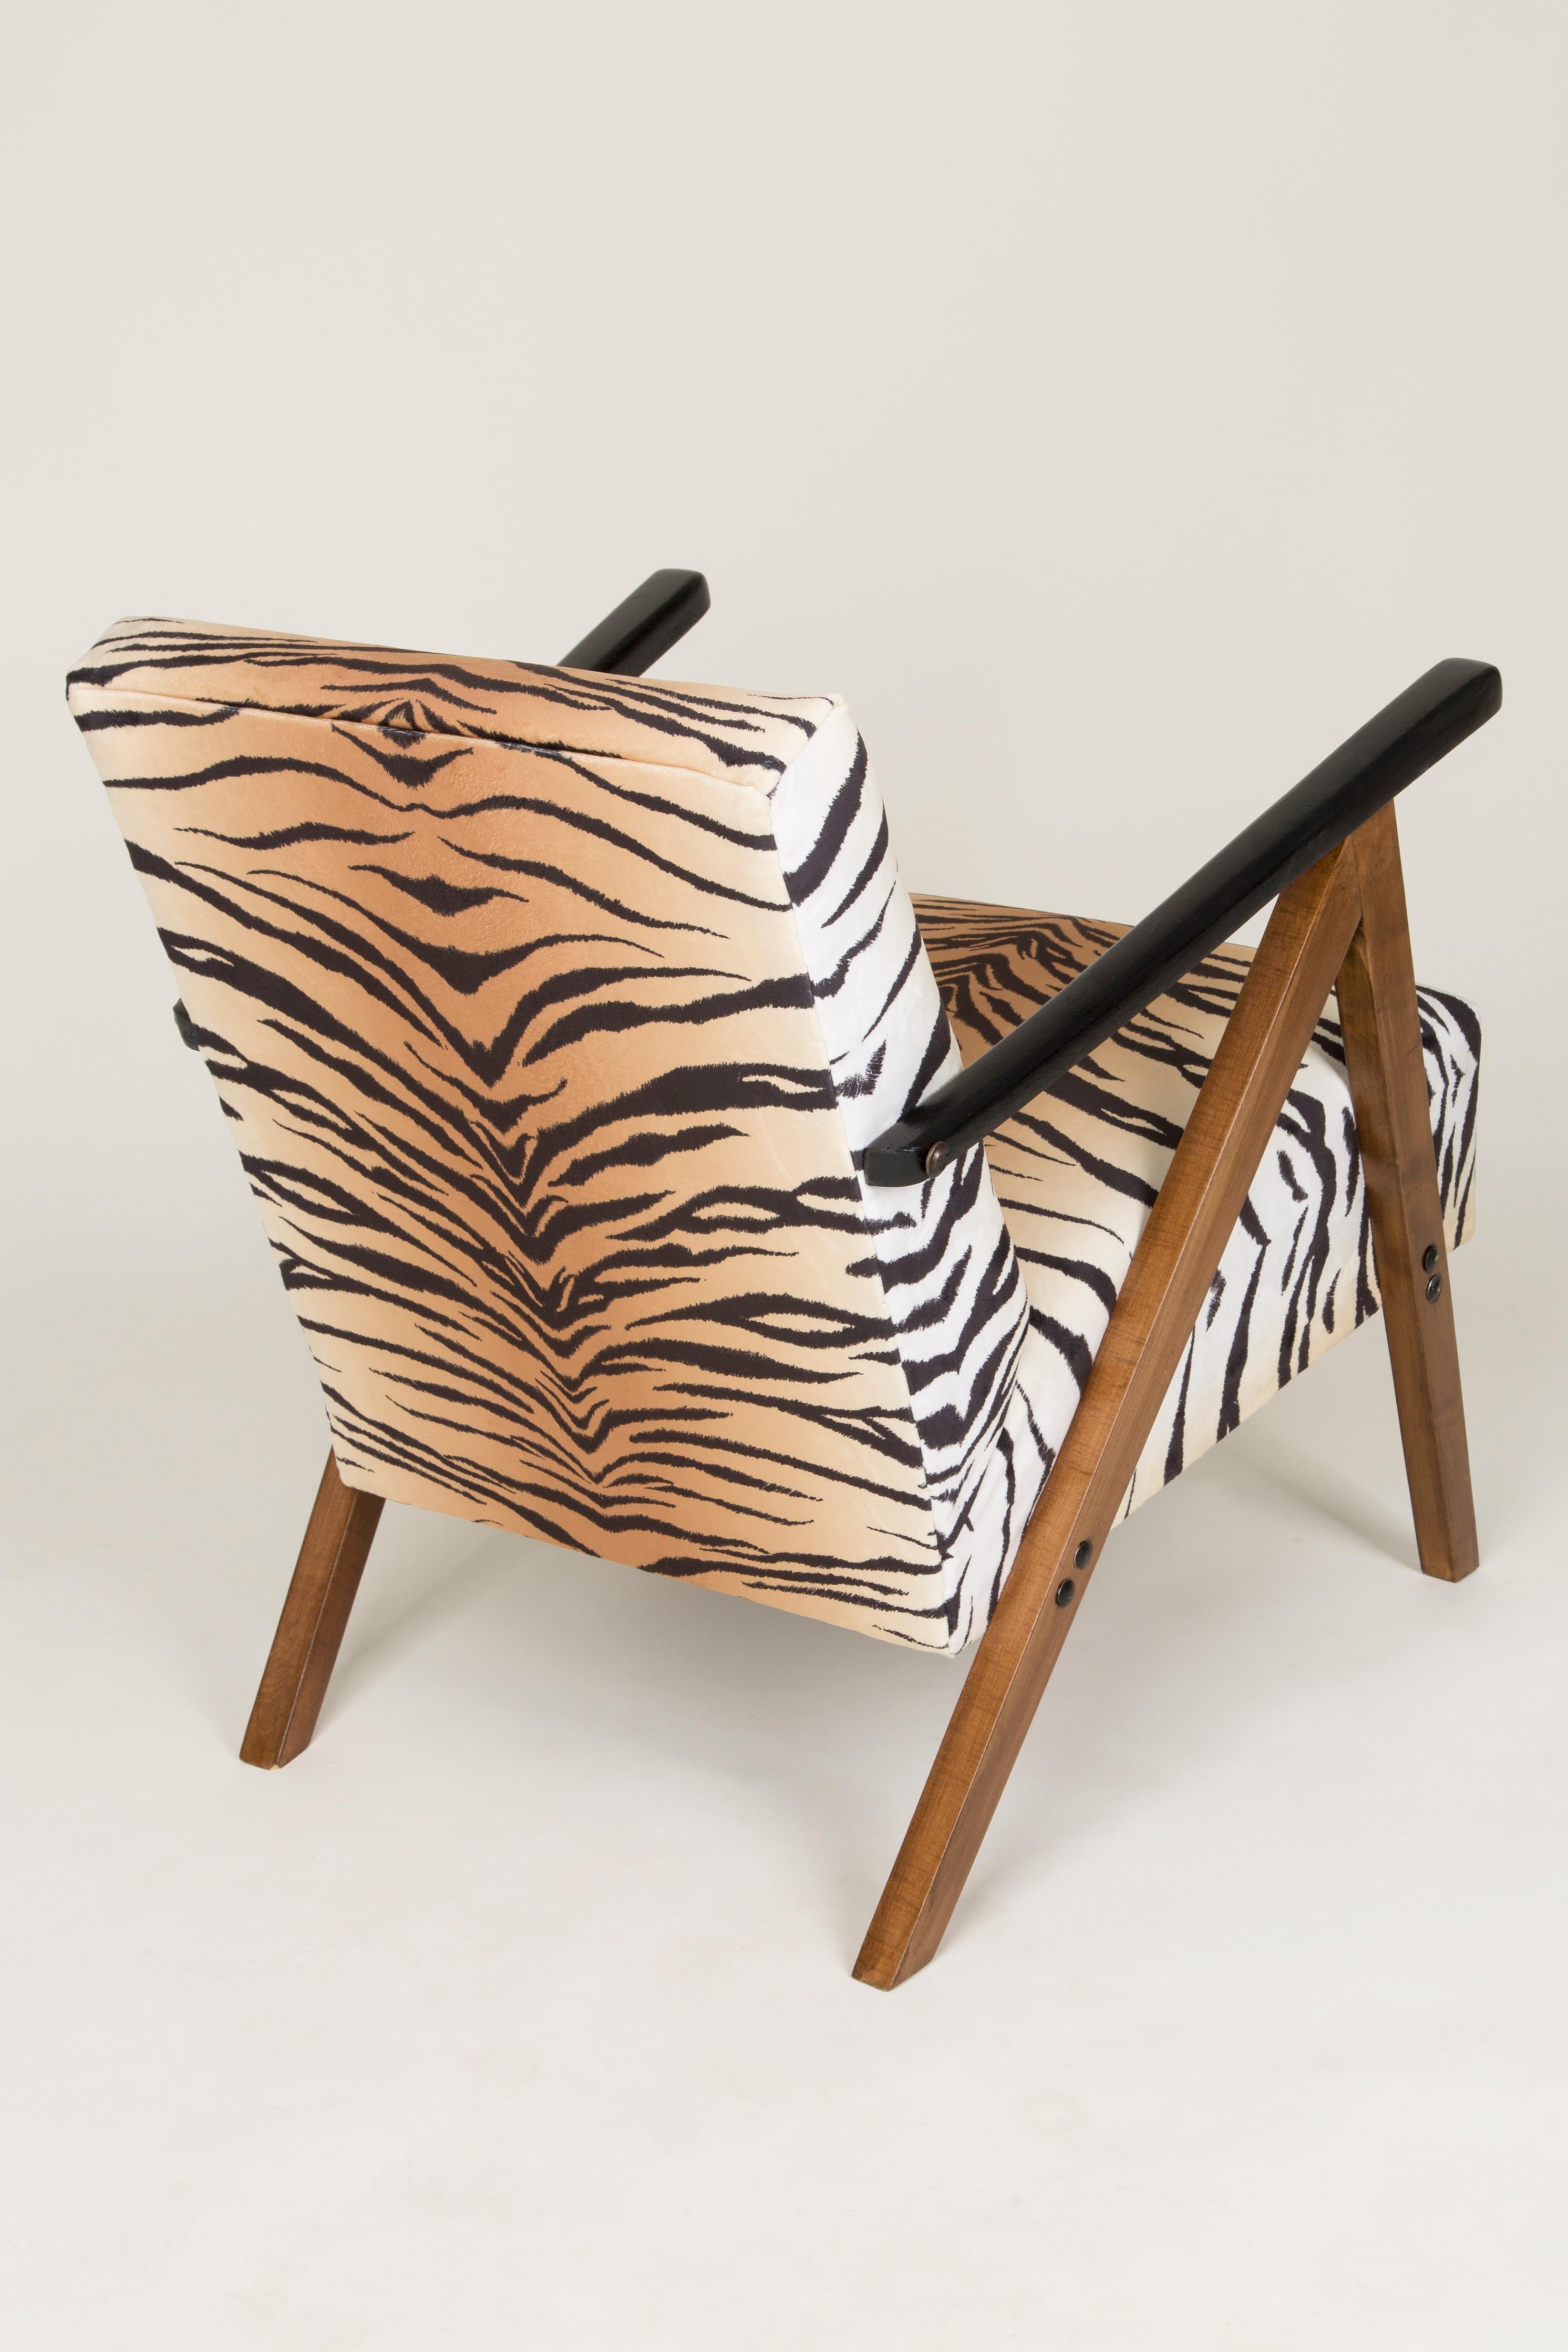 Velvet Set of Two Mid-Century Modern Tiger Print Armchairs, 1960s, Germany For Sale